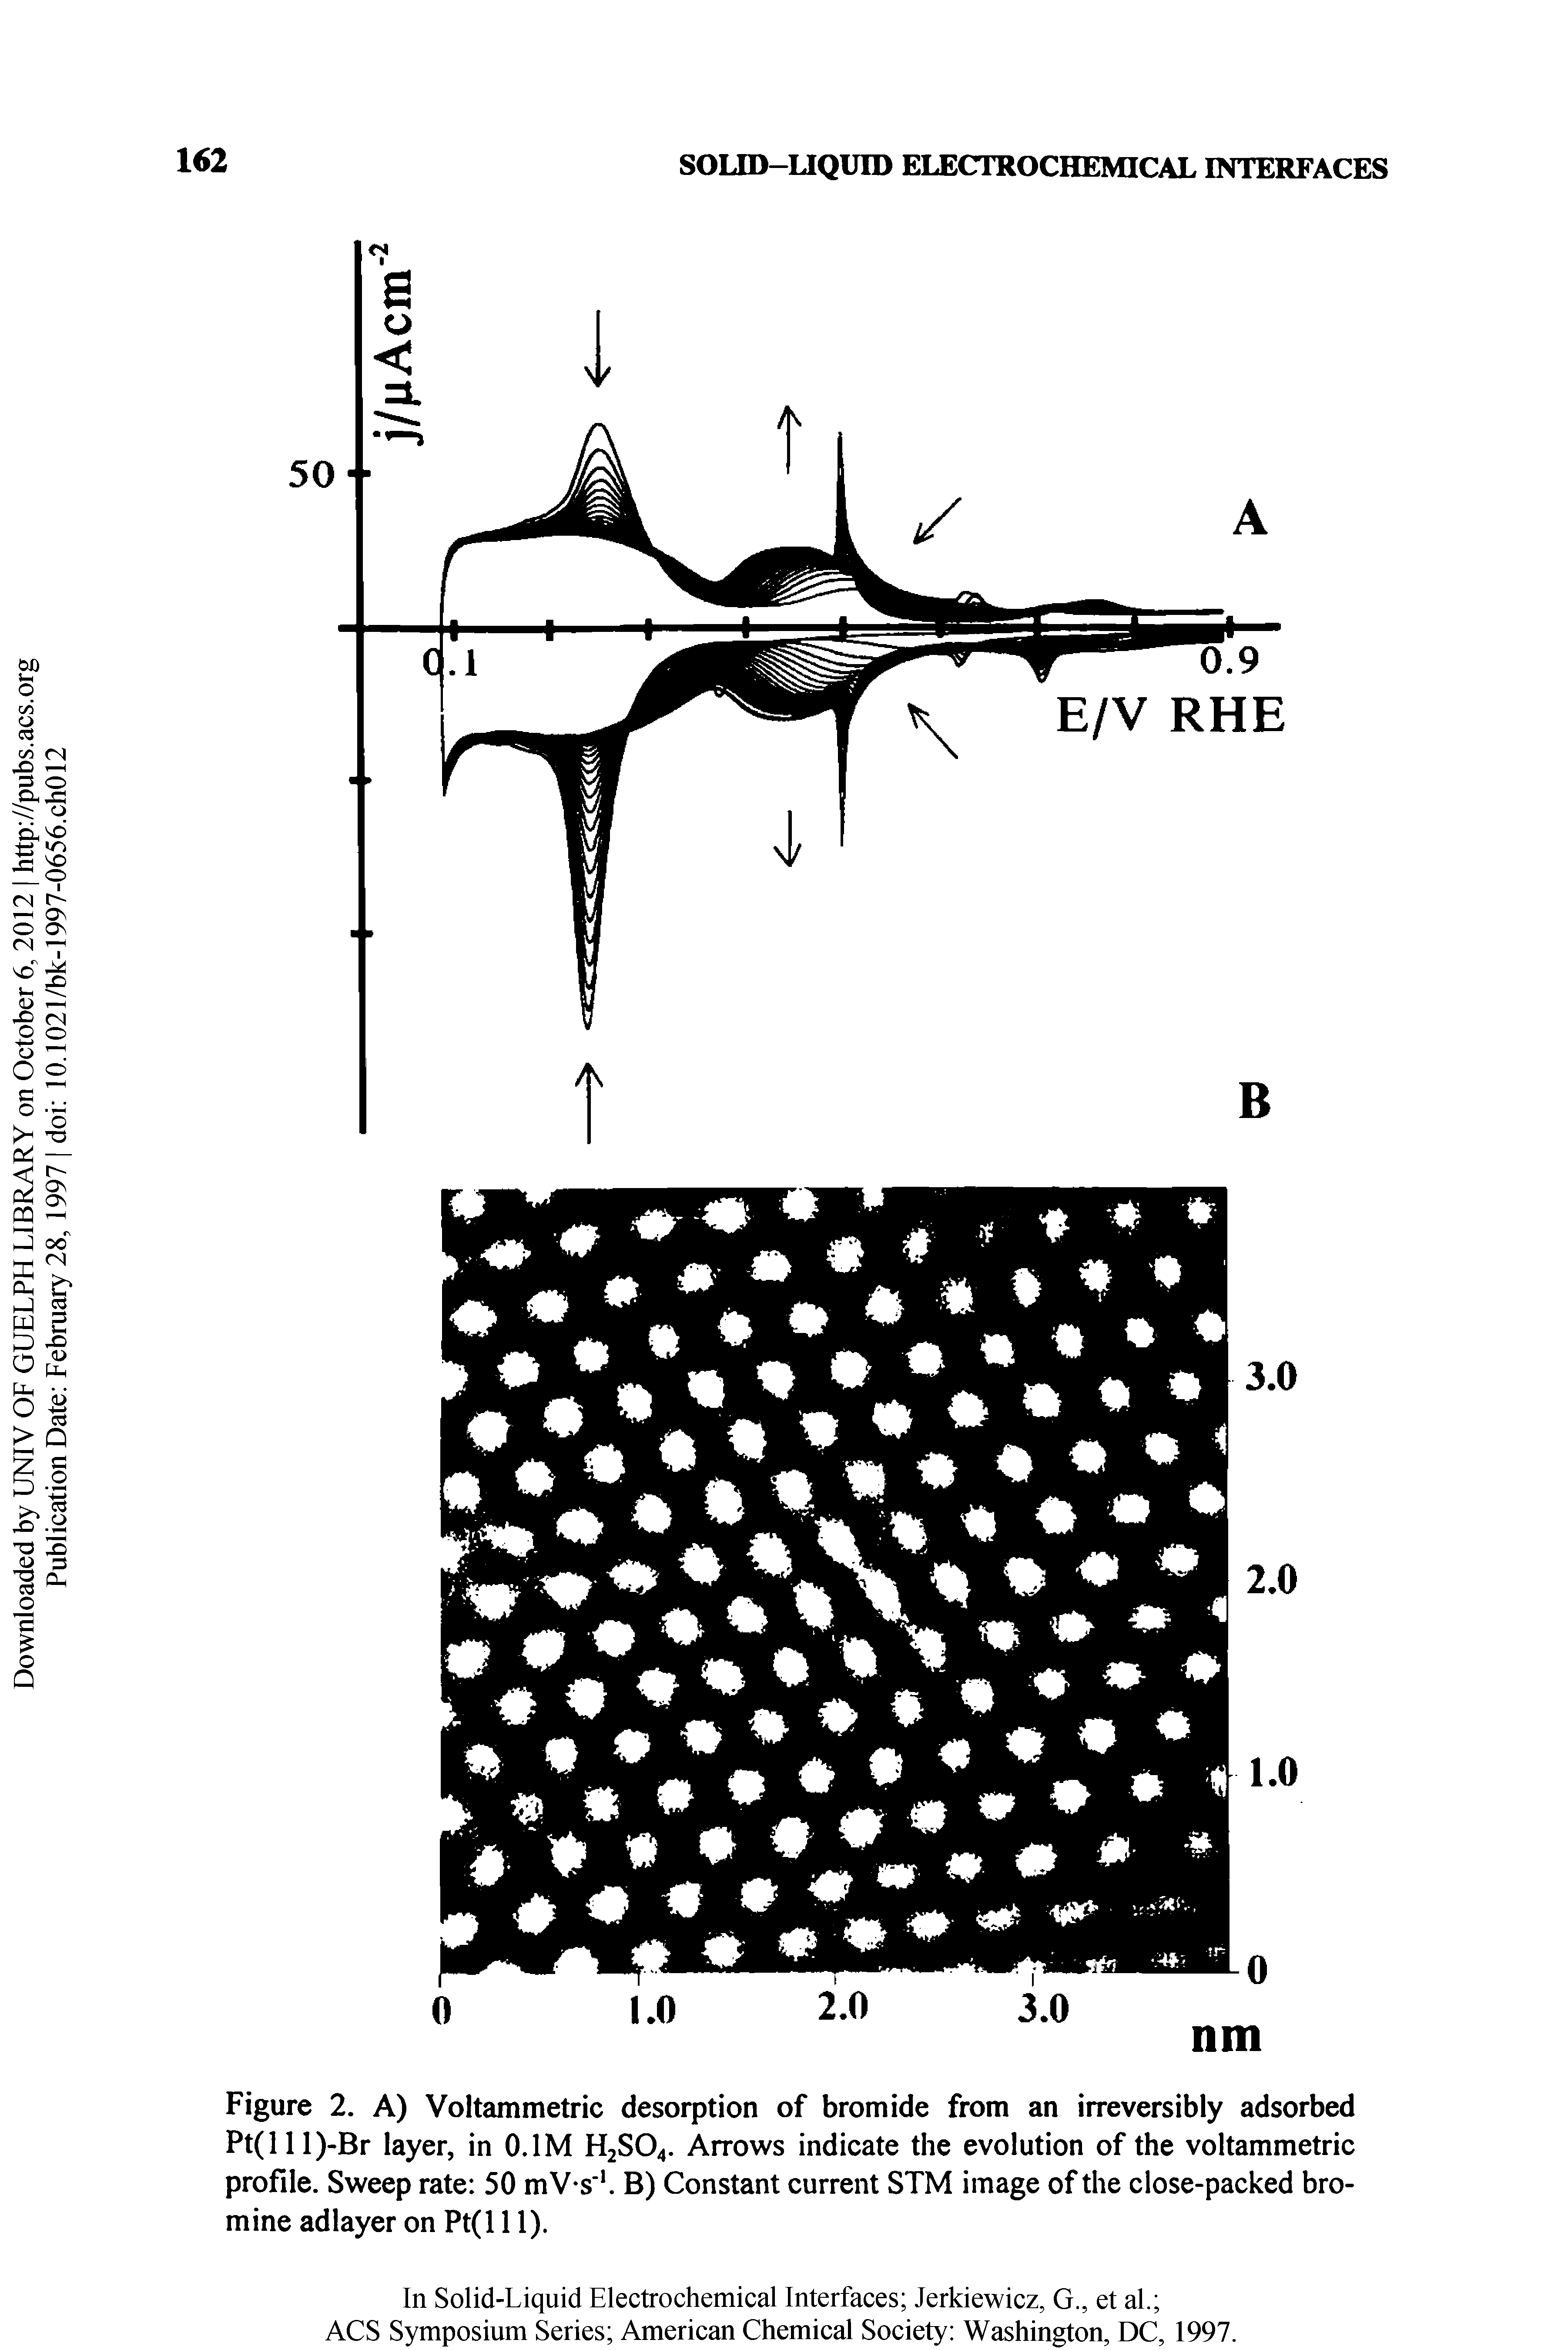 Figure 2. A) Voltammetric desorption of bromide from an irreversibly adsorbed Pt(lll)-Br layer, in O.IM H2SO4. Arrows indicate the evolution of the voltammetric profile. Sweep rate 50 mV s . B) Constant current STM image of the close-packed bromine adlayer on Pt(l 11).